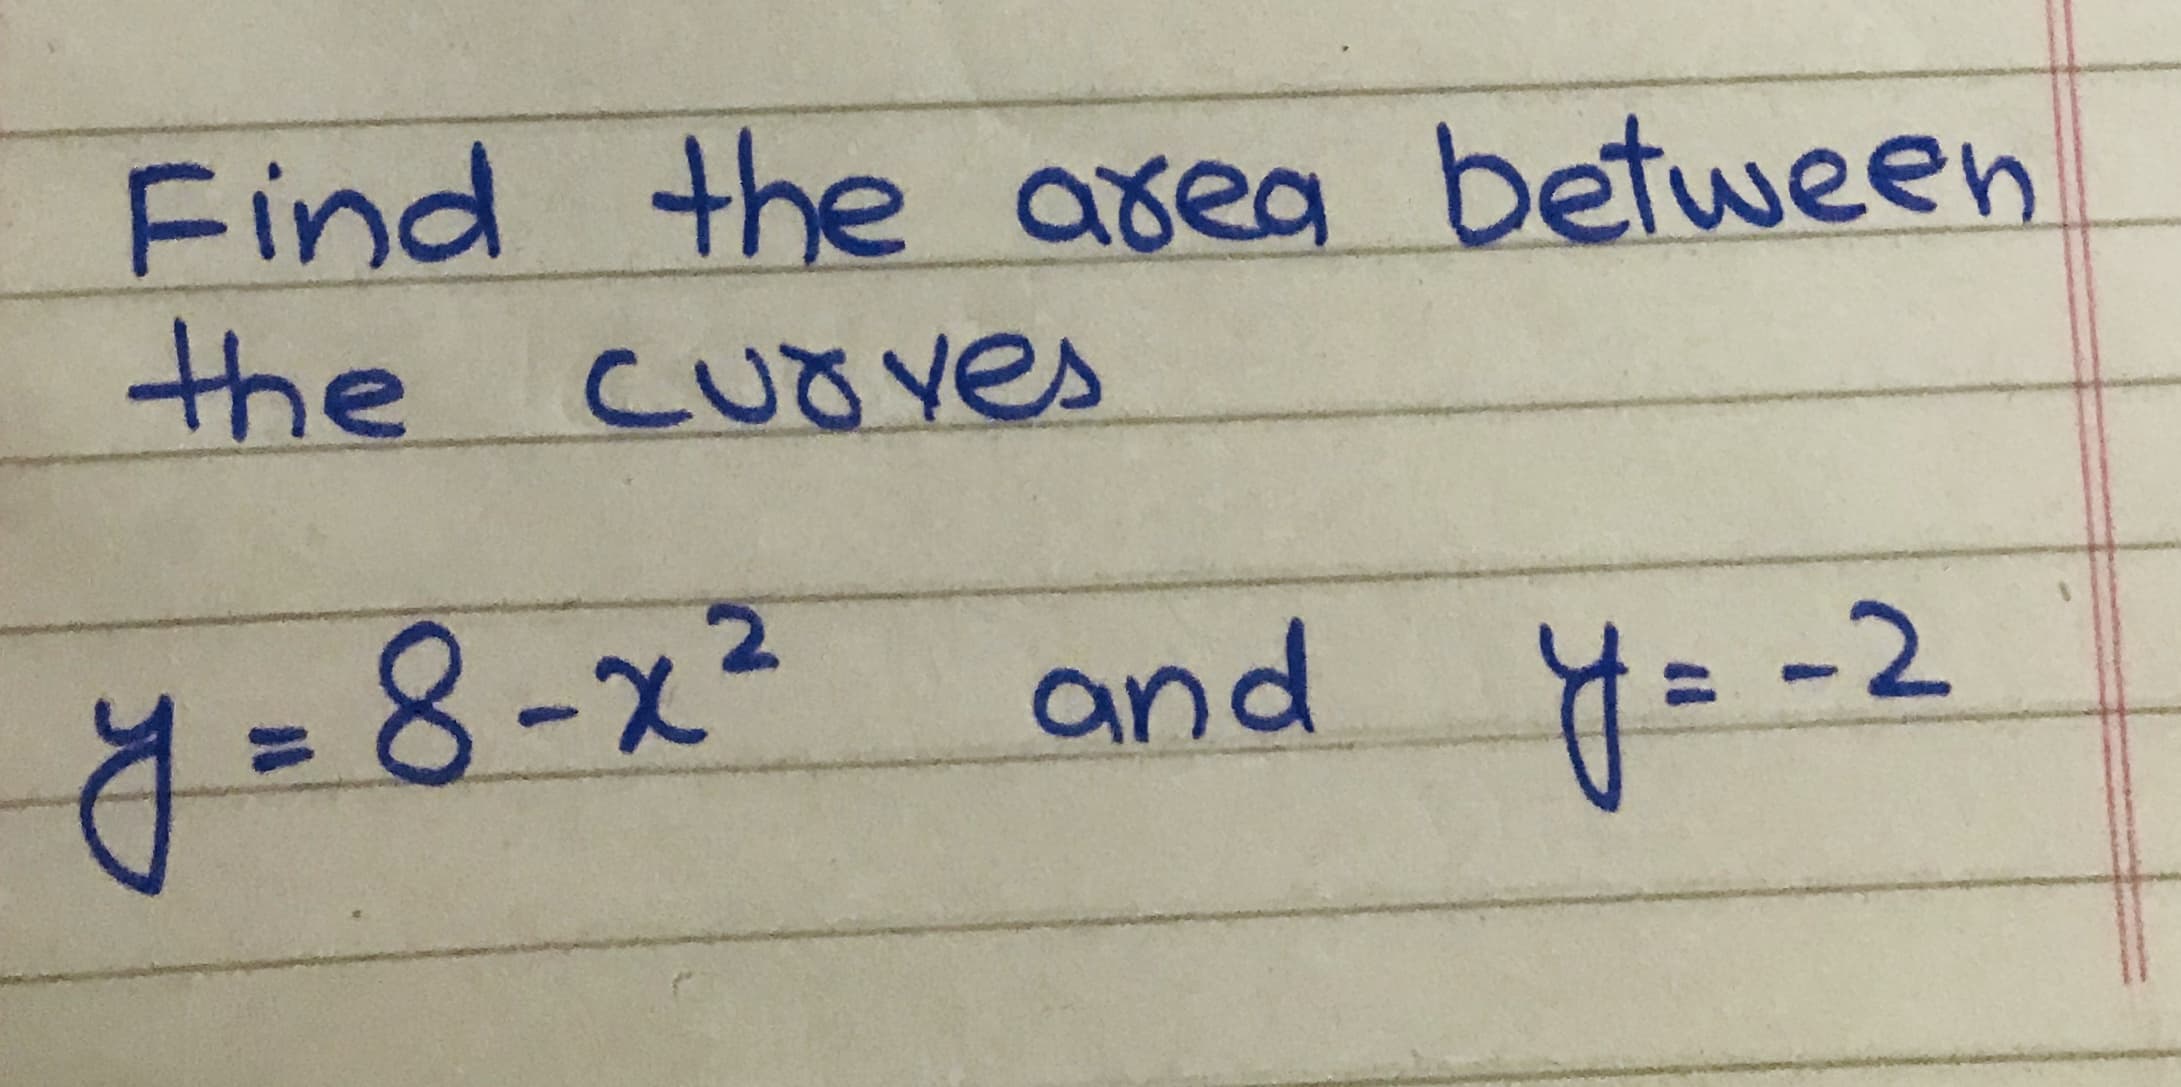 Find the area between
the cuo ves
CUrres
y=8-x² and y= -2
